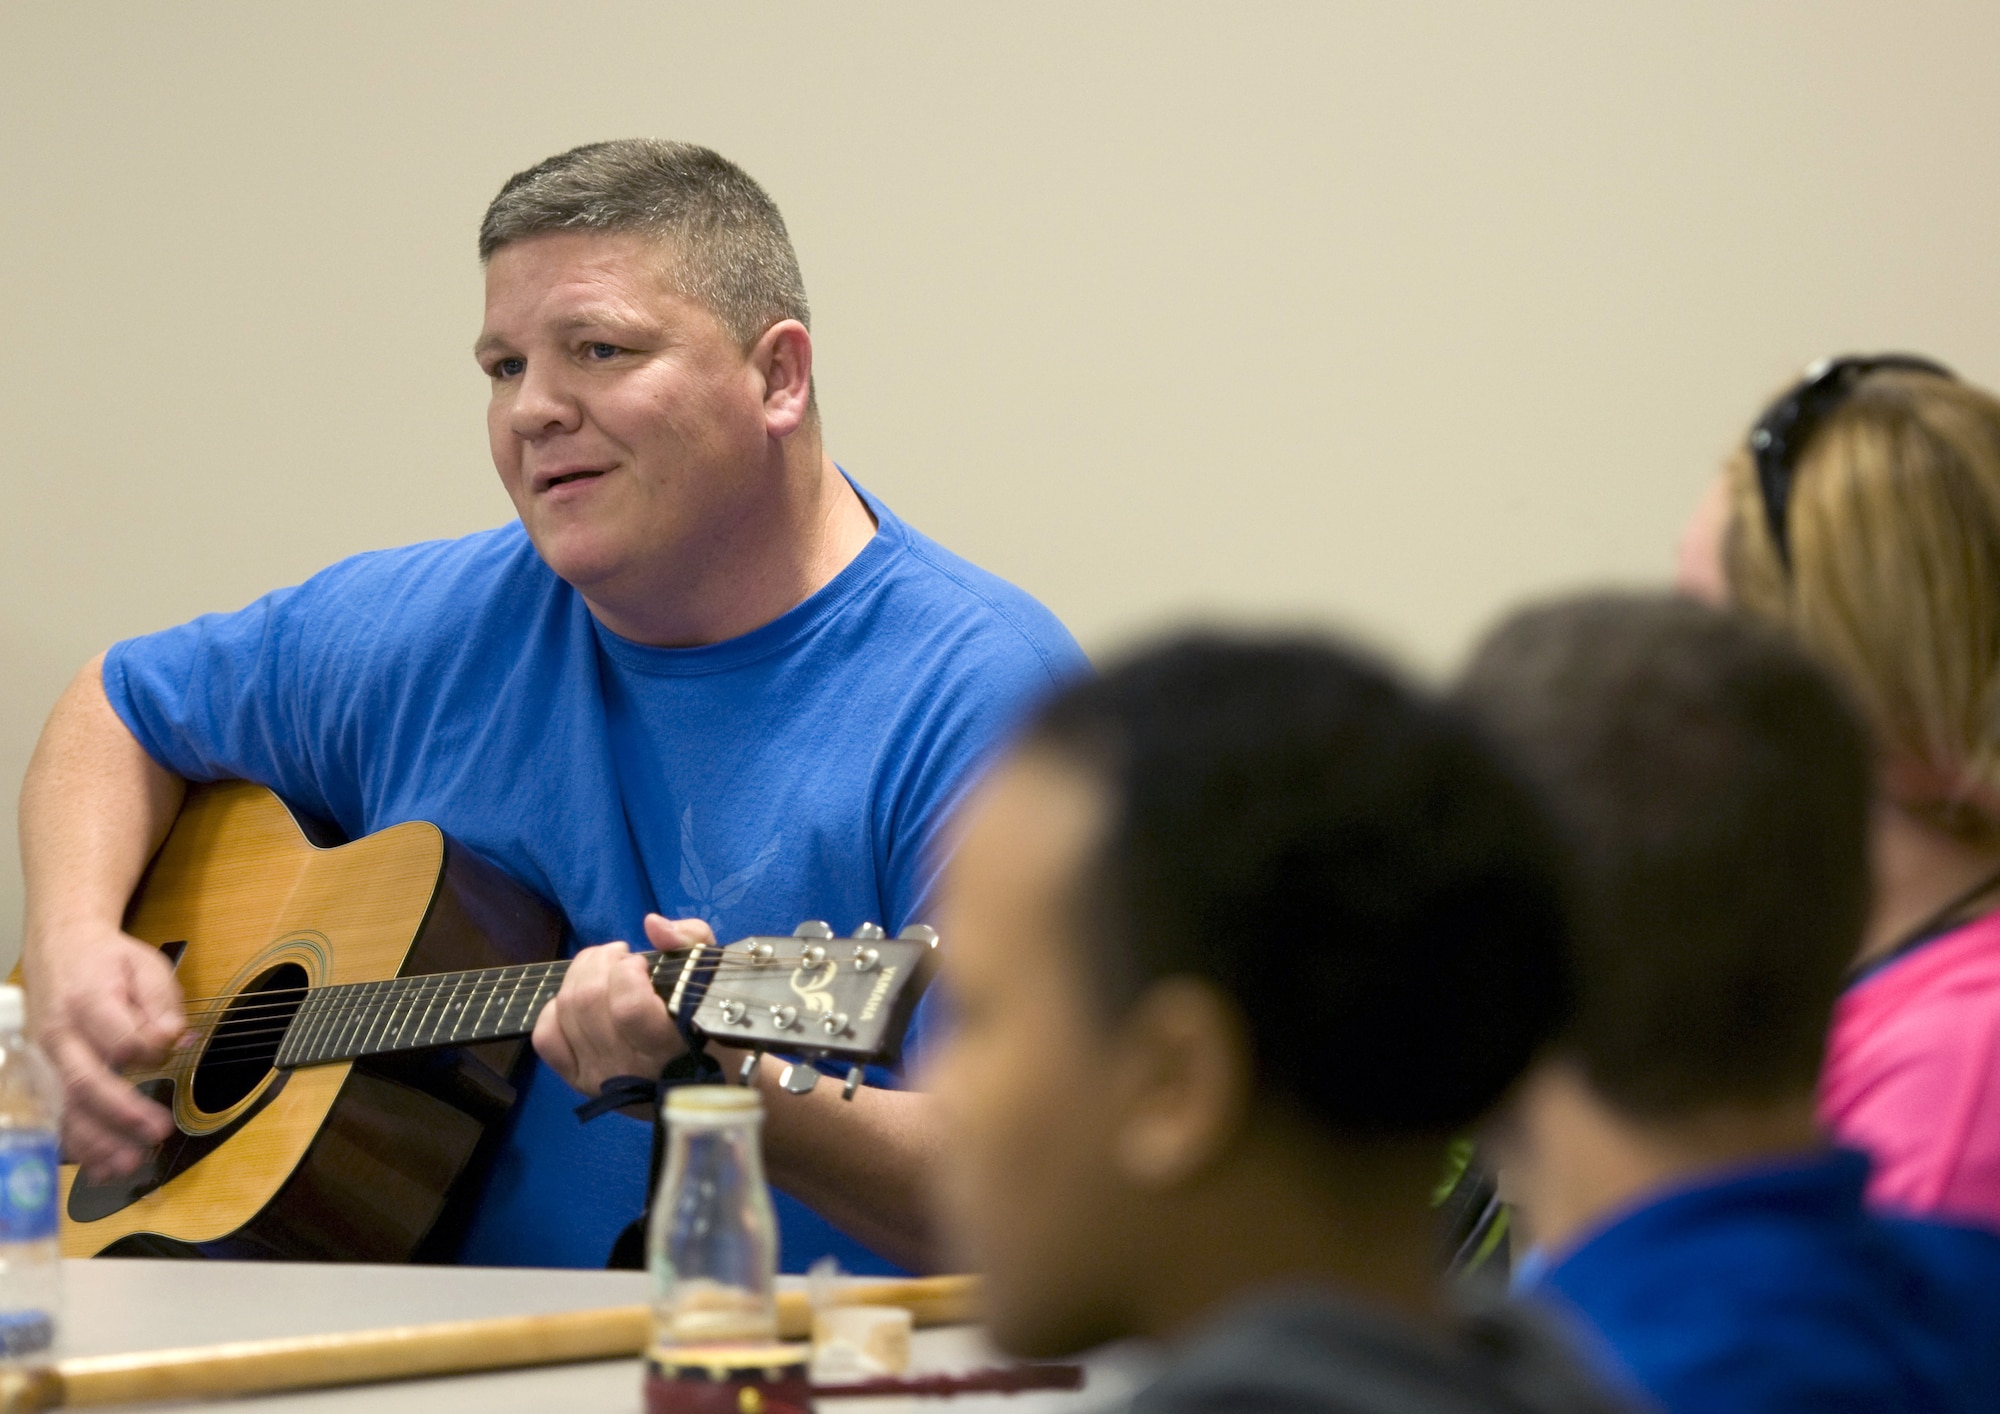 Former Maj. Frank Vassar plays one of his songs to fellow wounded Airmen during a music therapy session Nov. 19, 2015, on Joint Base Andrews, Md., as part of Warrior CARE Month. Airmen had the chance to use a variety of musical instruments and collaborate on songs in the sessions, which were intended to show wounded warriors a unique approach to therapy. (U.S. Air Force photo/Sean Kimmons)